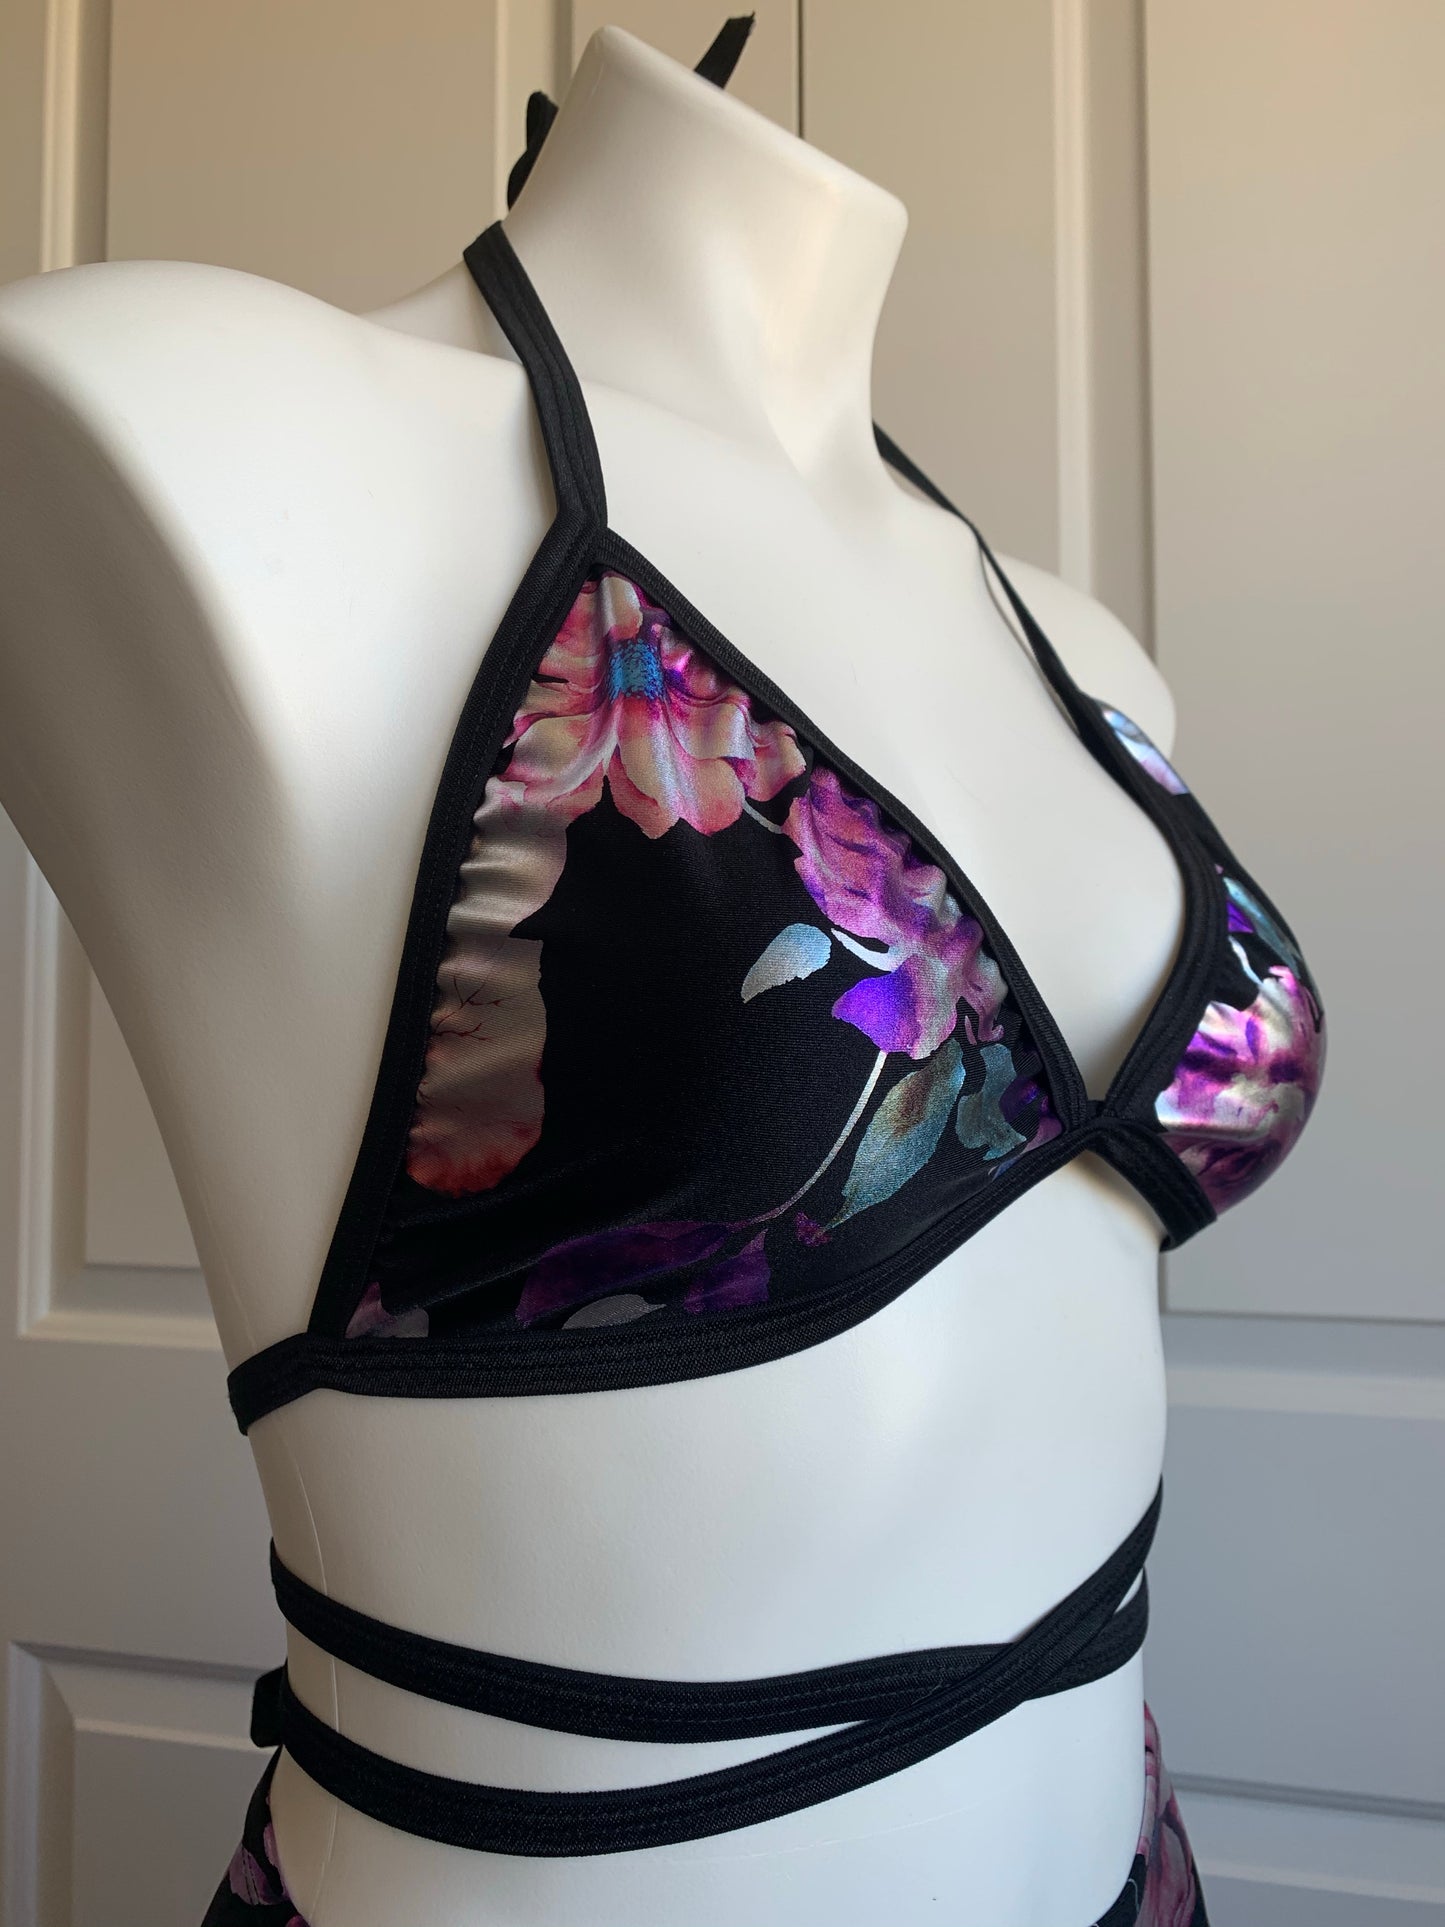 Metallic Roses Rave top, rave bralette, pattern top, holographic top, rave outfit, edc outfit - Electric Couture Dolls